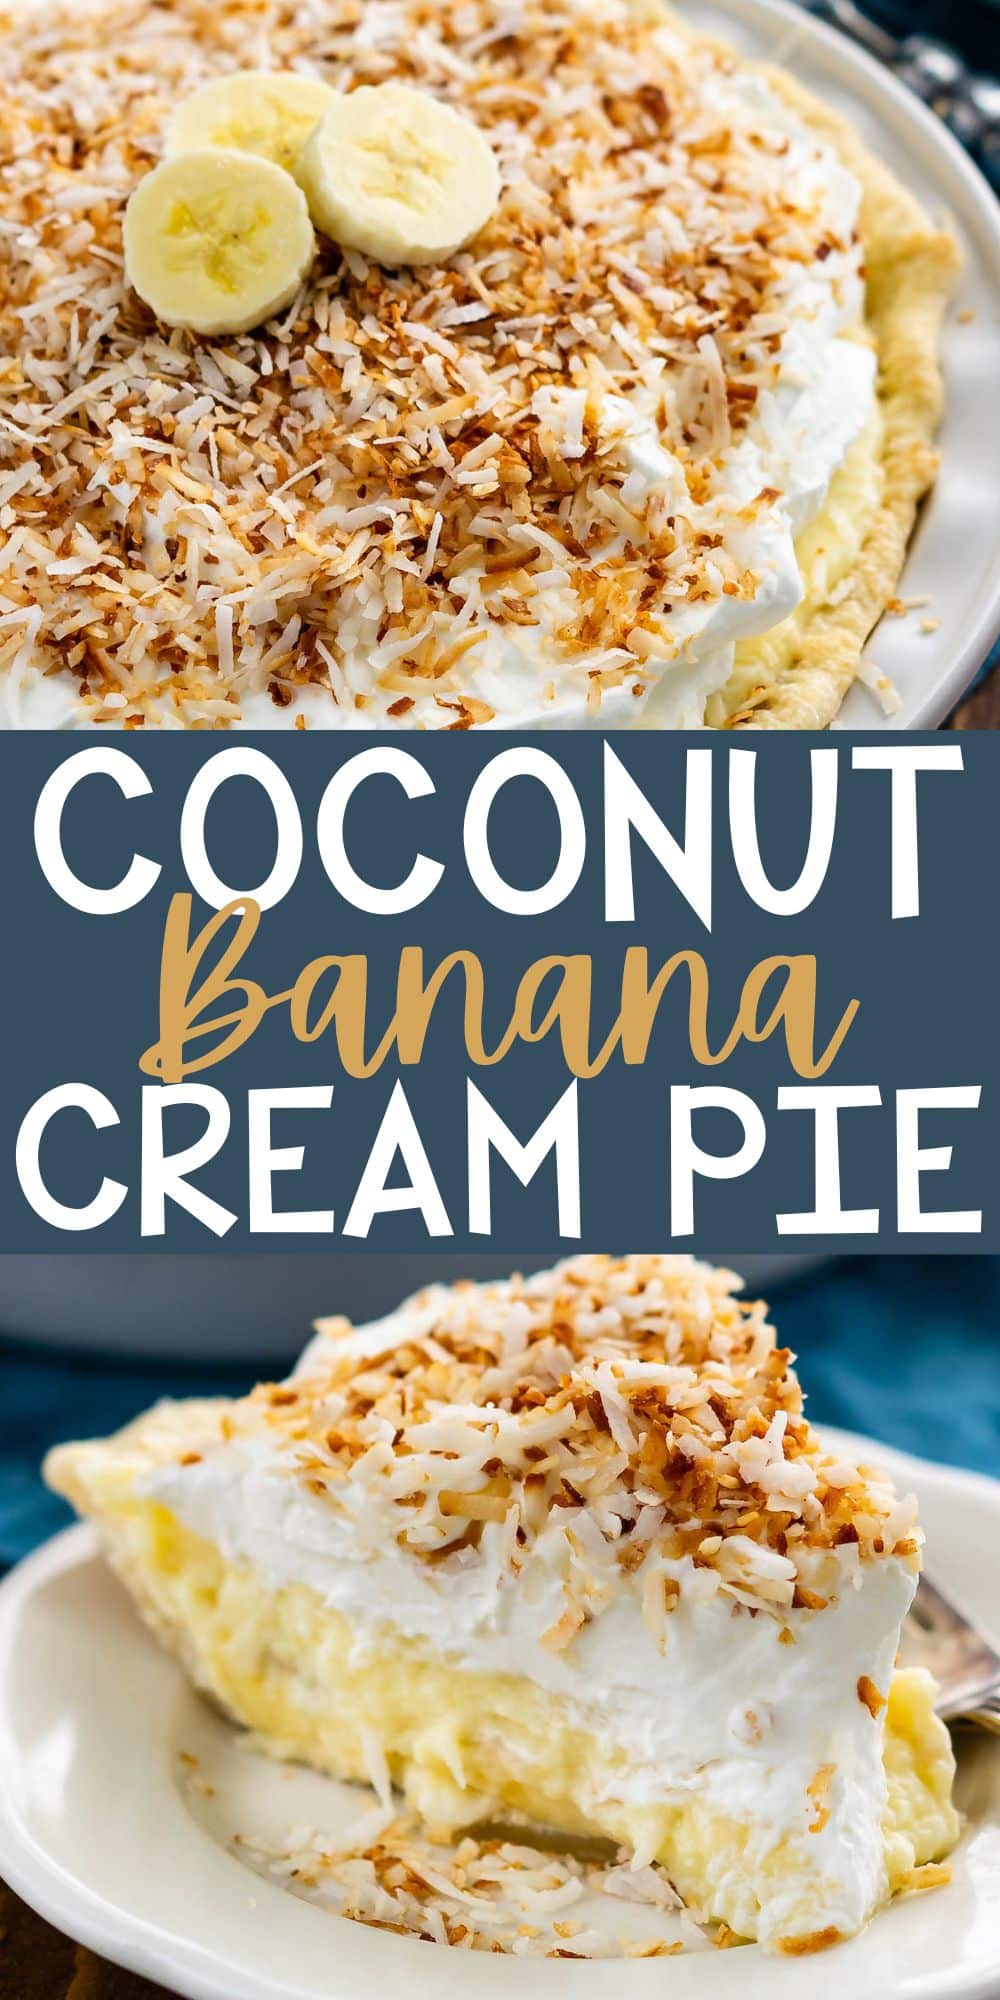 two photos of full banana cream pie topped with shredded coconut and sliced bananas with words on the image.